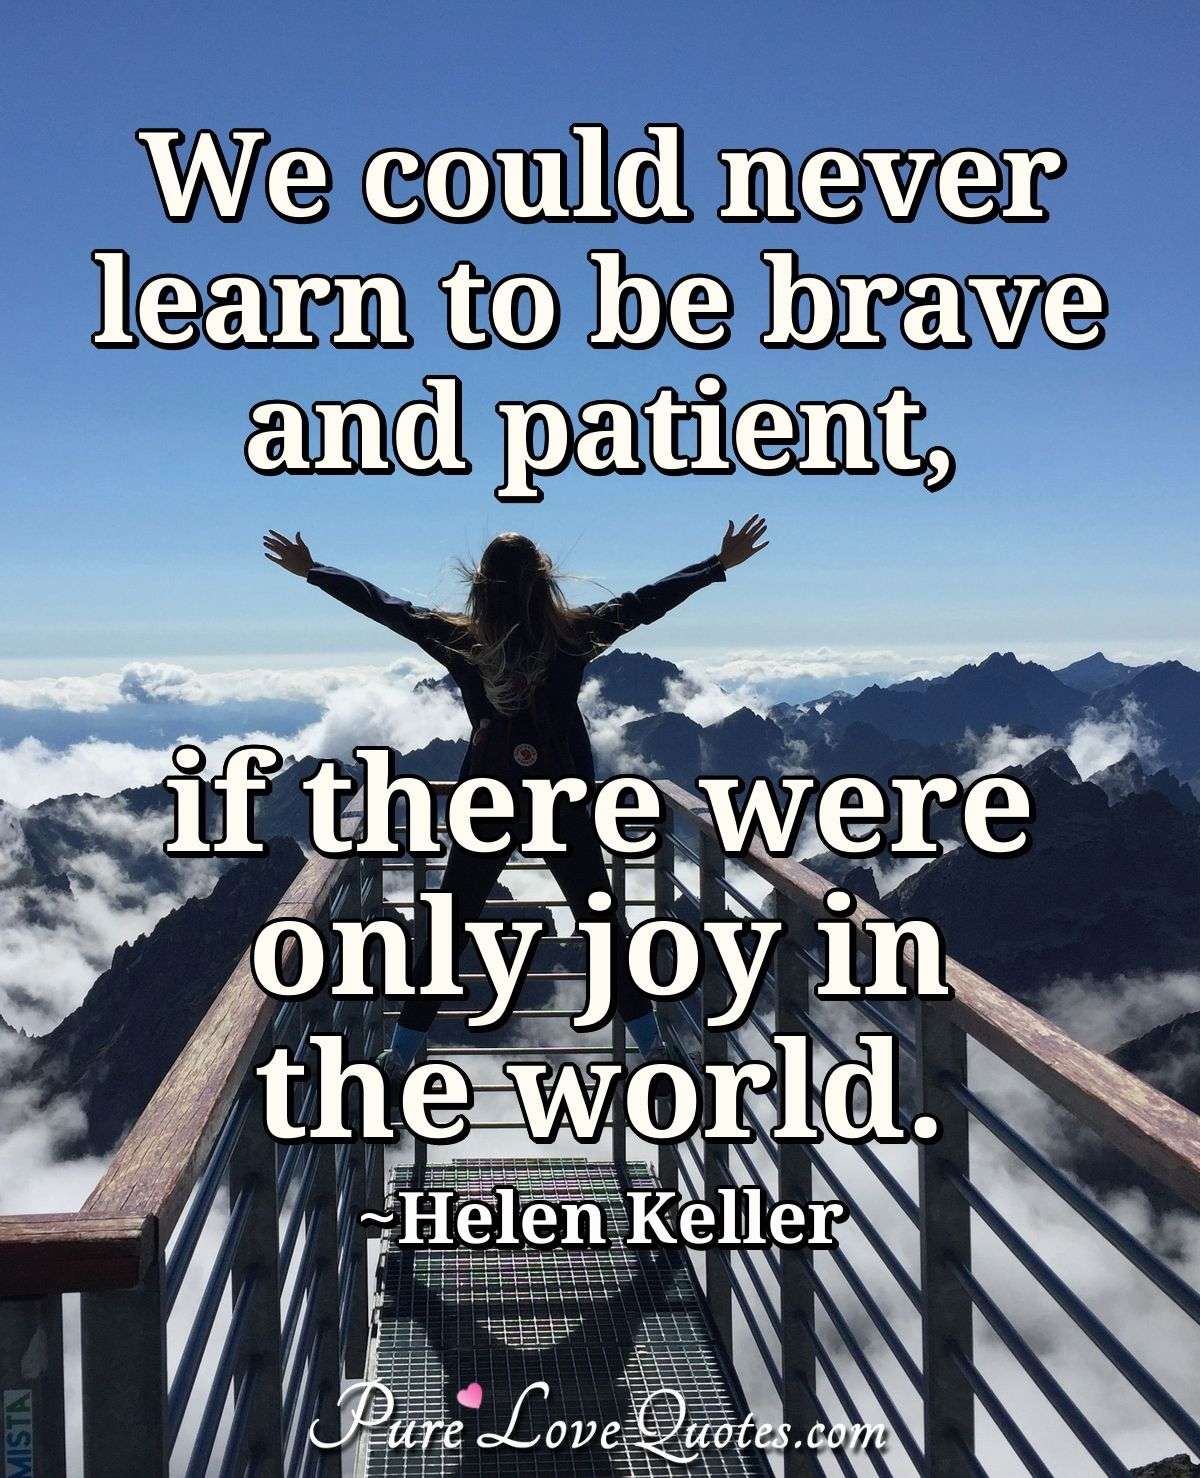 We could never learn to be brave and patient, if there were only joy in the world.